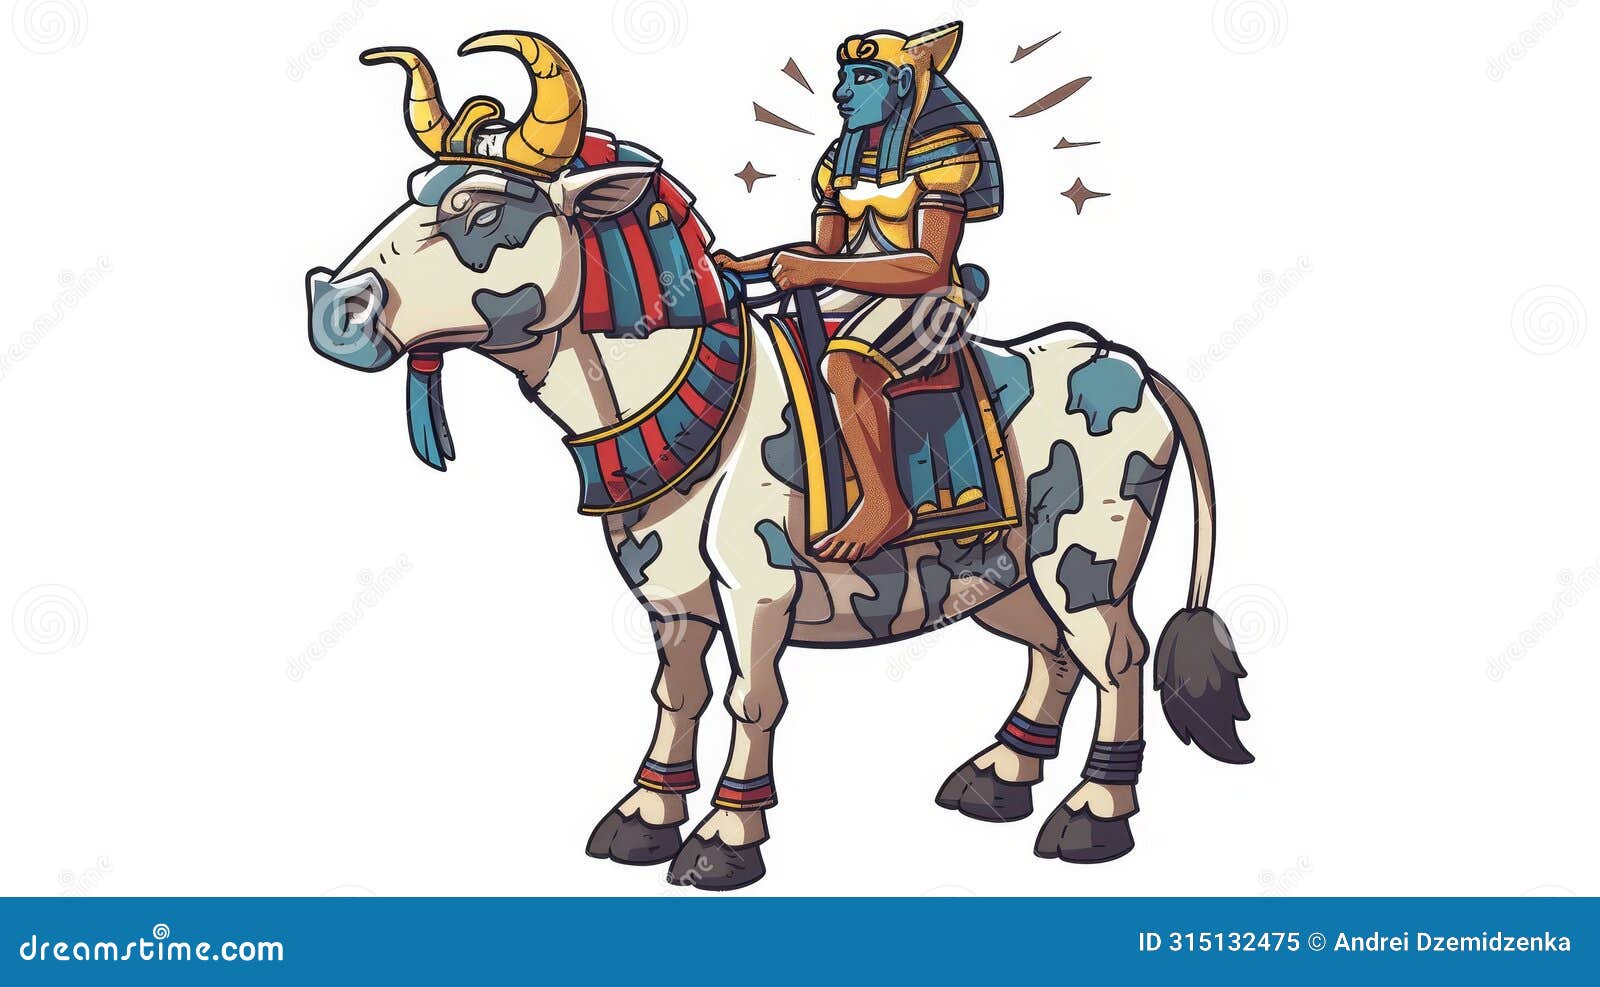 ancient egyptian legend cartoon modern. egyptian culture religious , ra, sits on back of star-covered cow, goddess